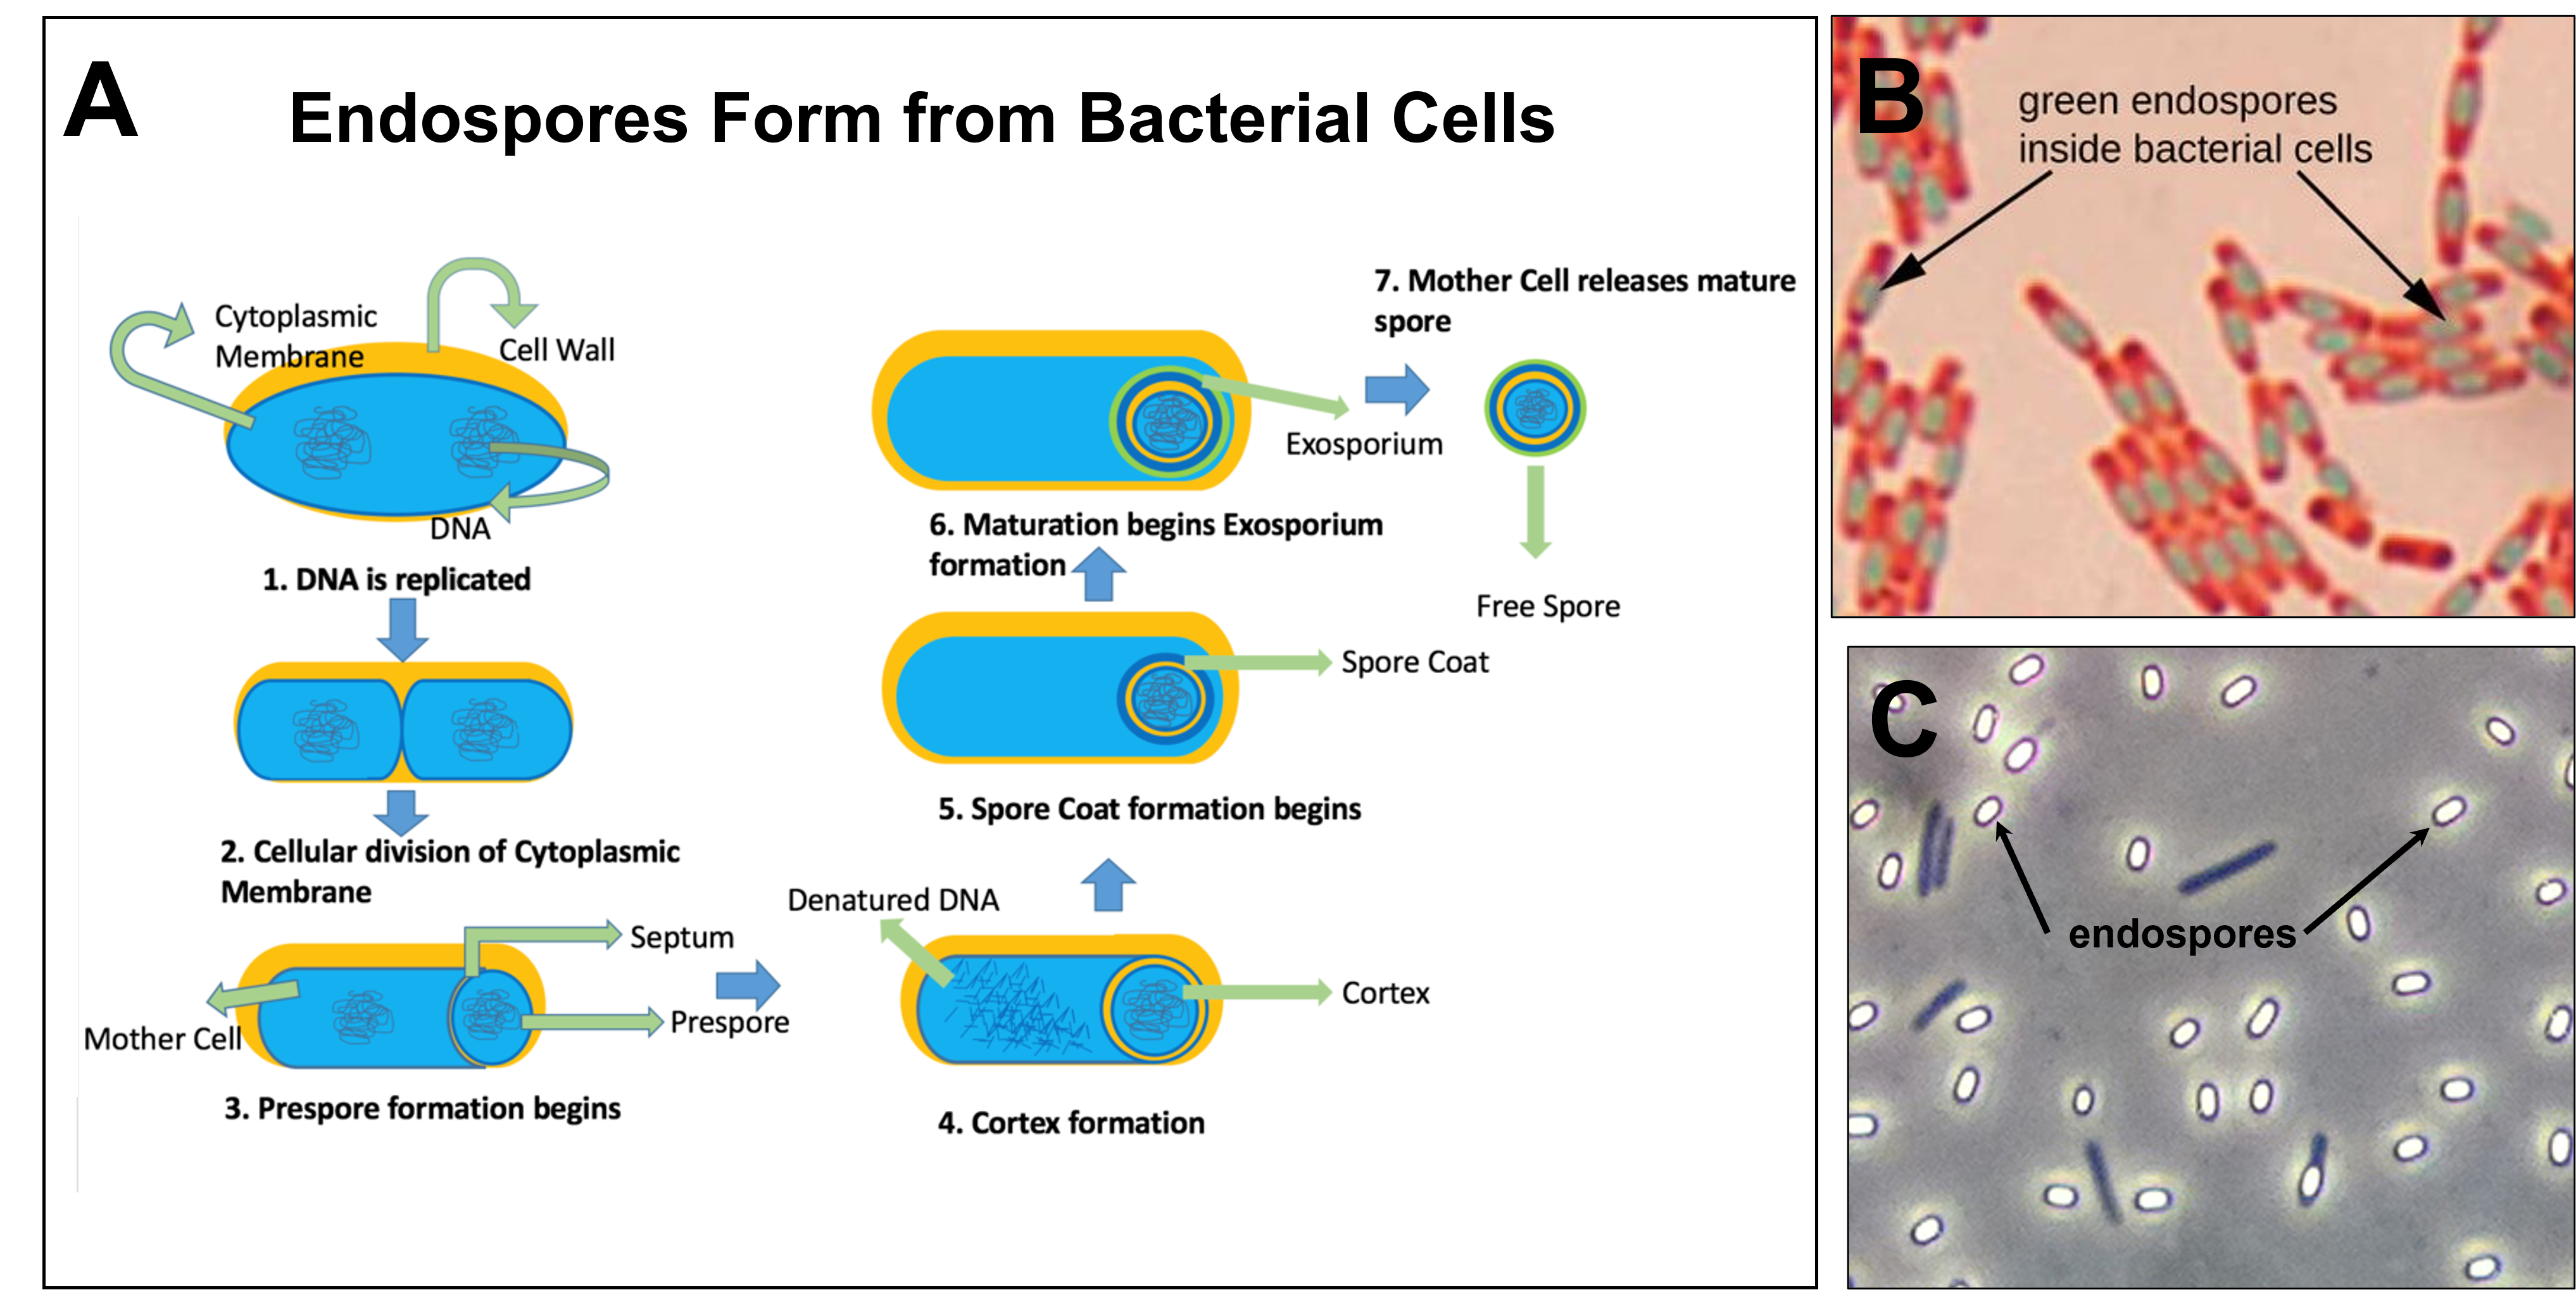 endospore formation and how endospores appear in the microscope